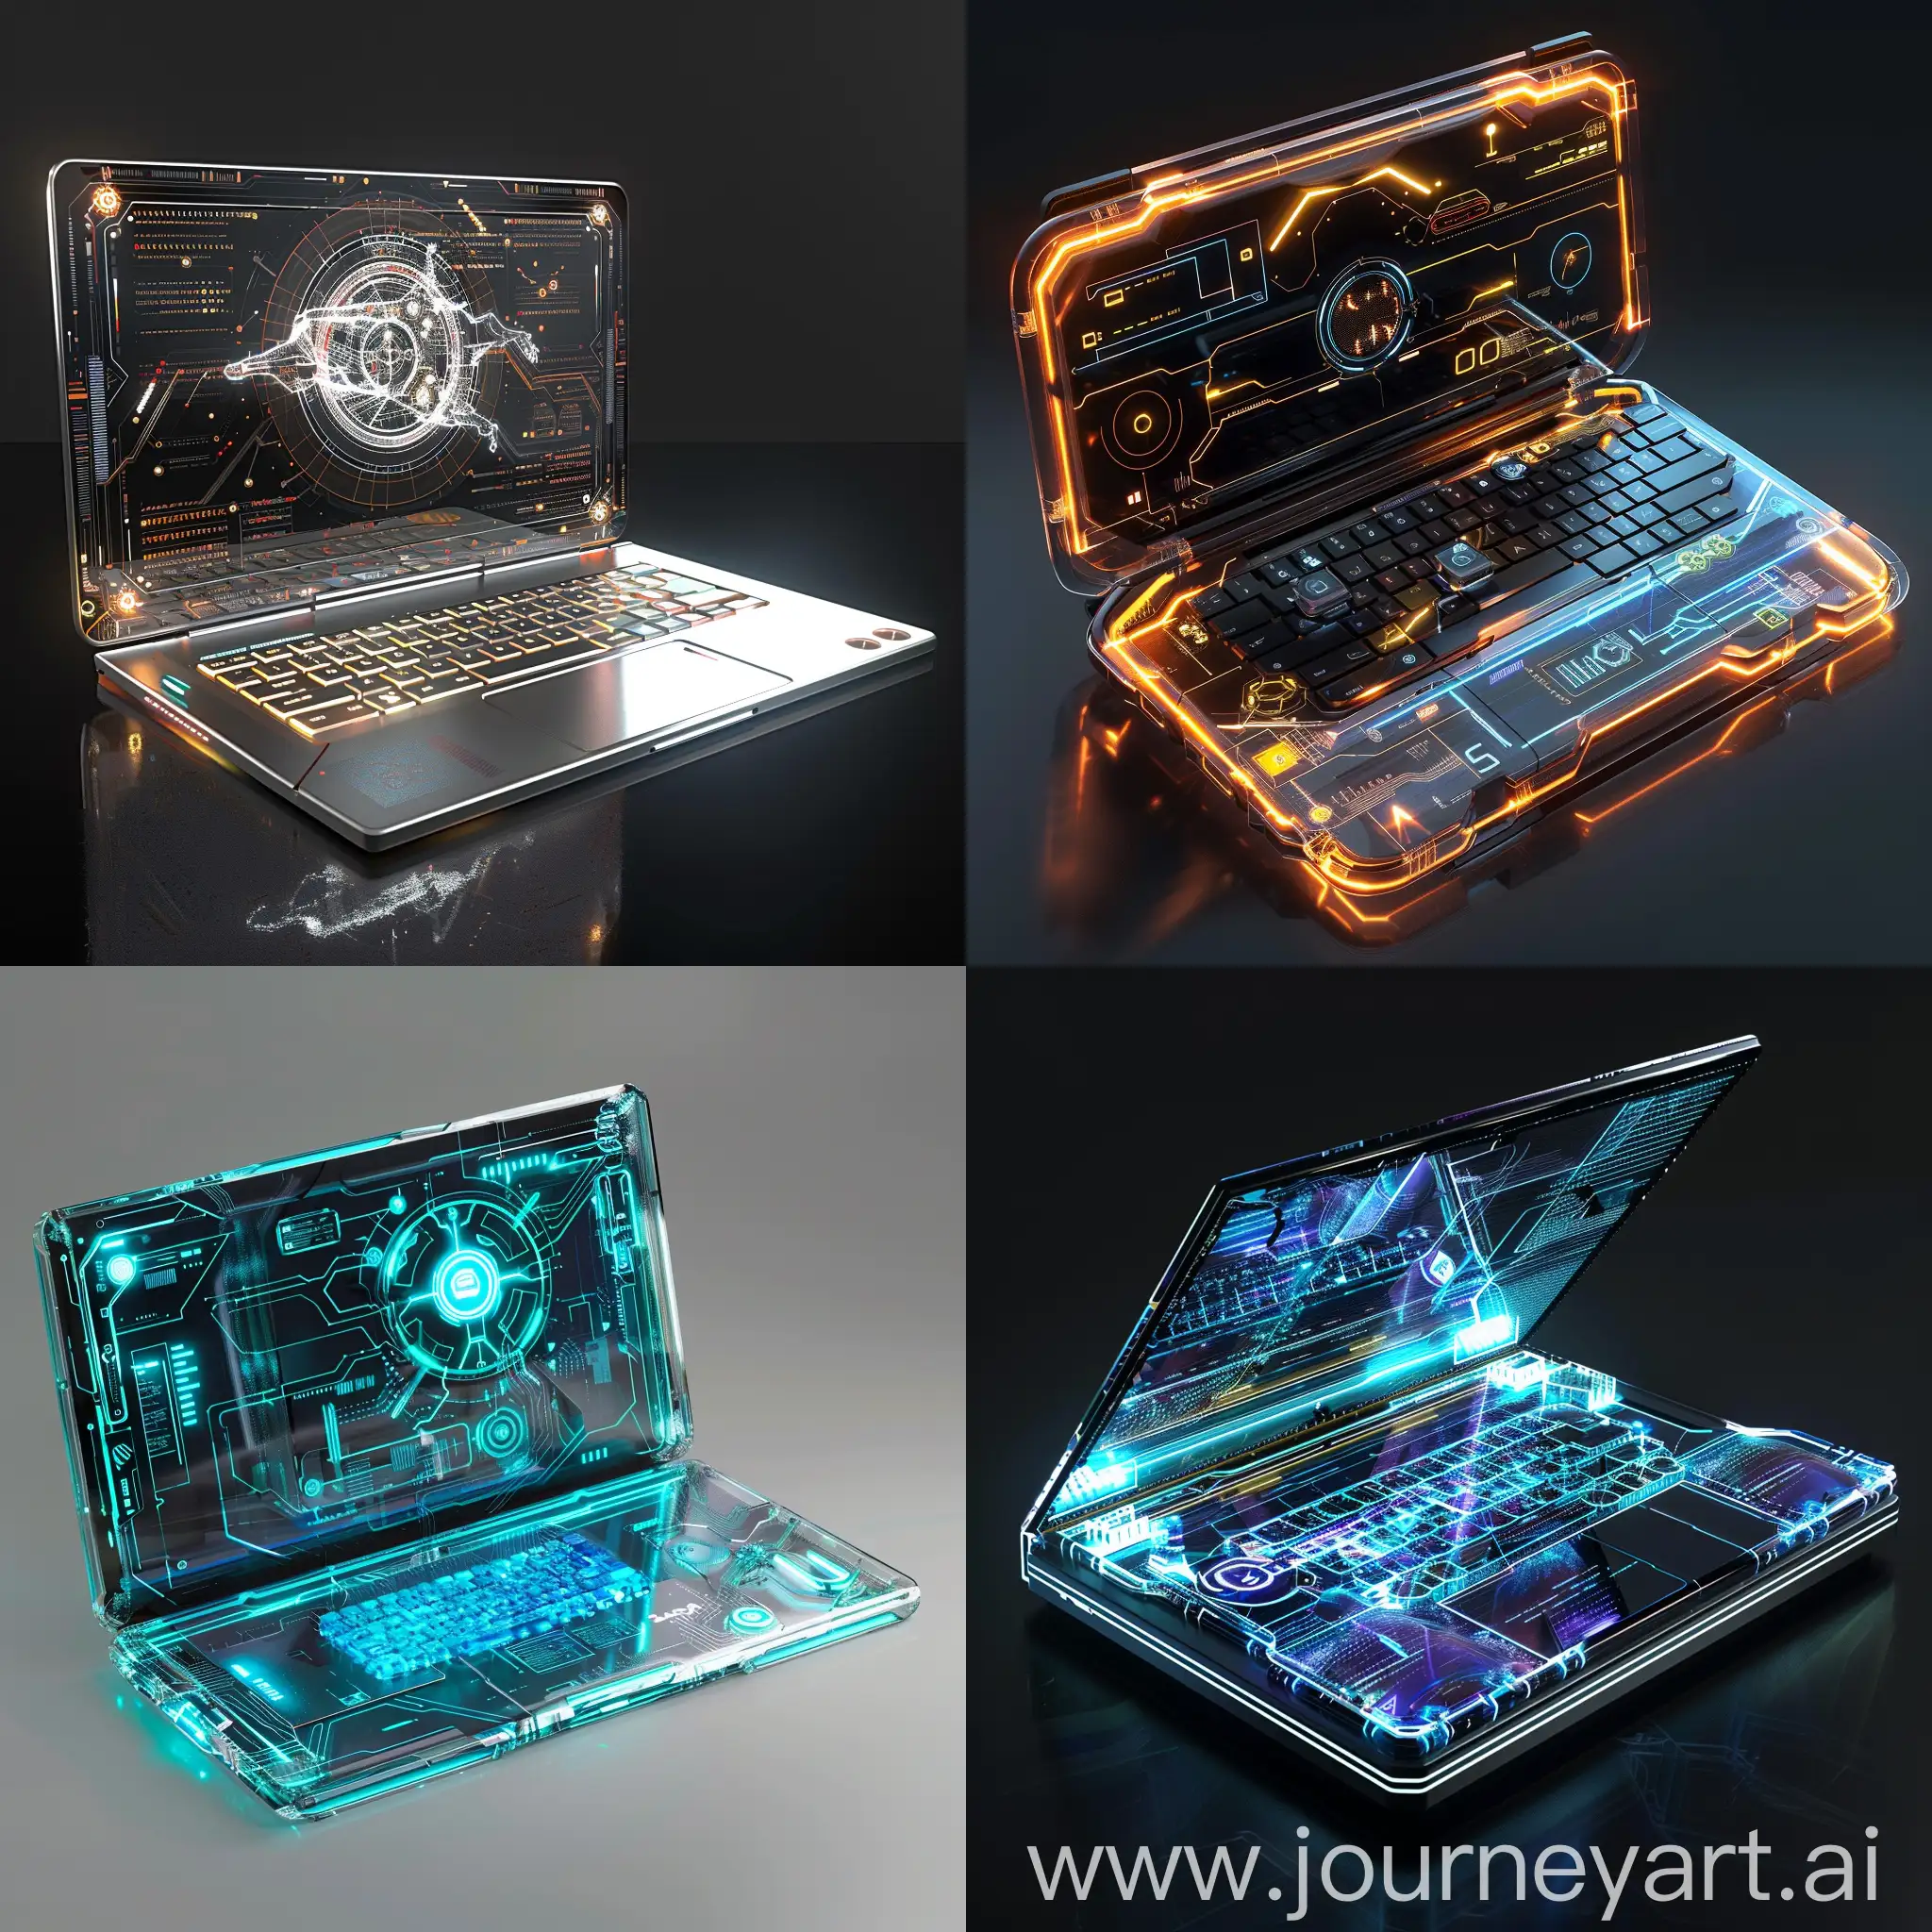 Futuristic-SciFi-Laptop-with-Molecular-Memory-Storage-and-Holographic-Displays